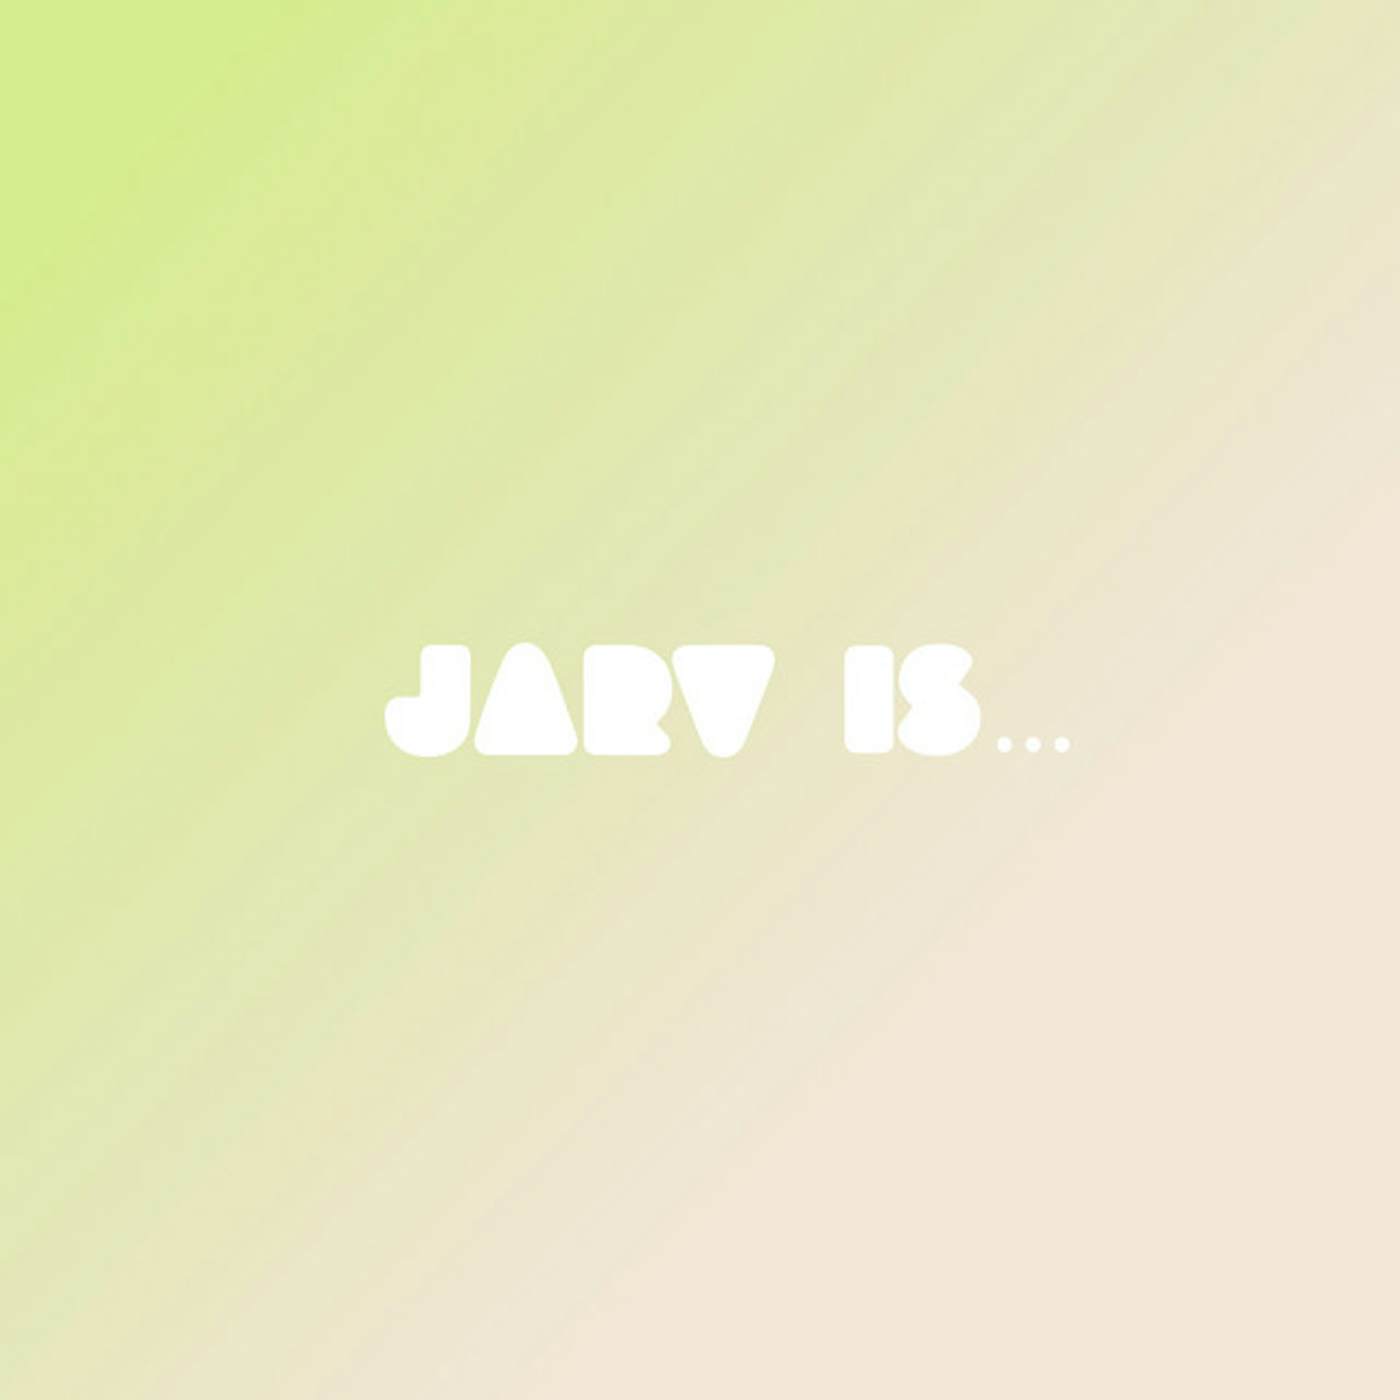 JARV IS... House Music All Night Long Vinyl Record